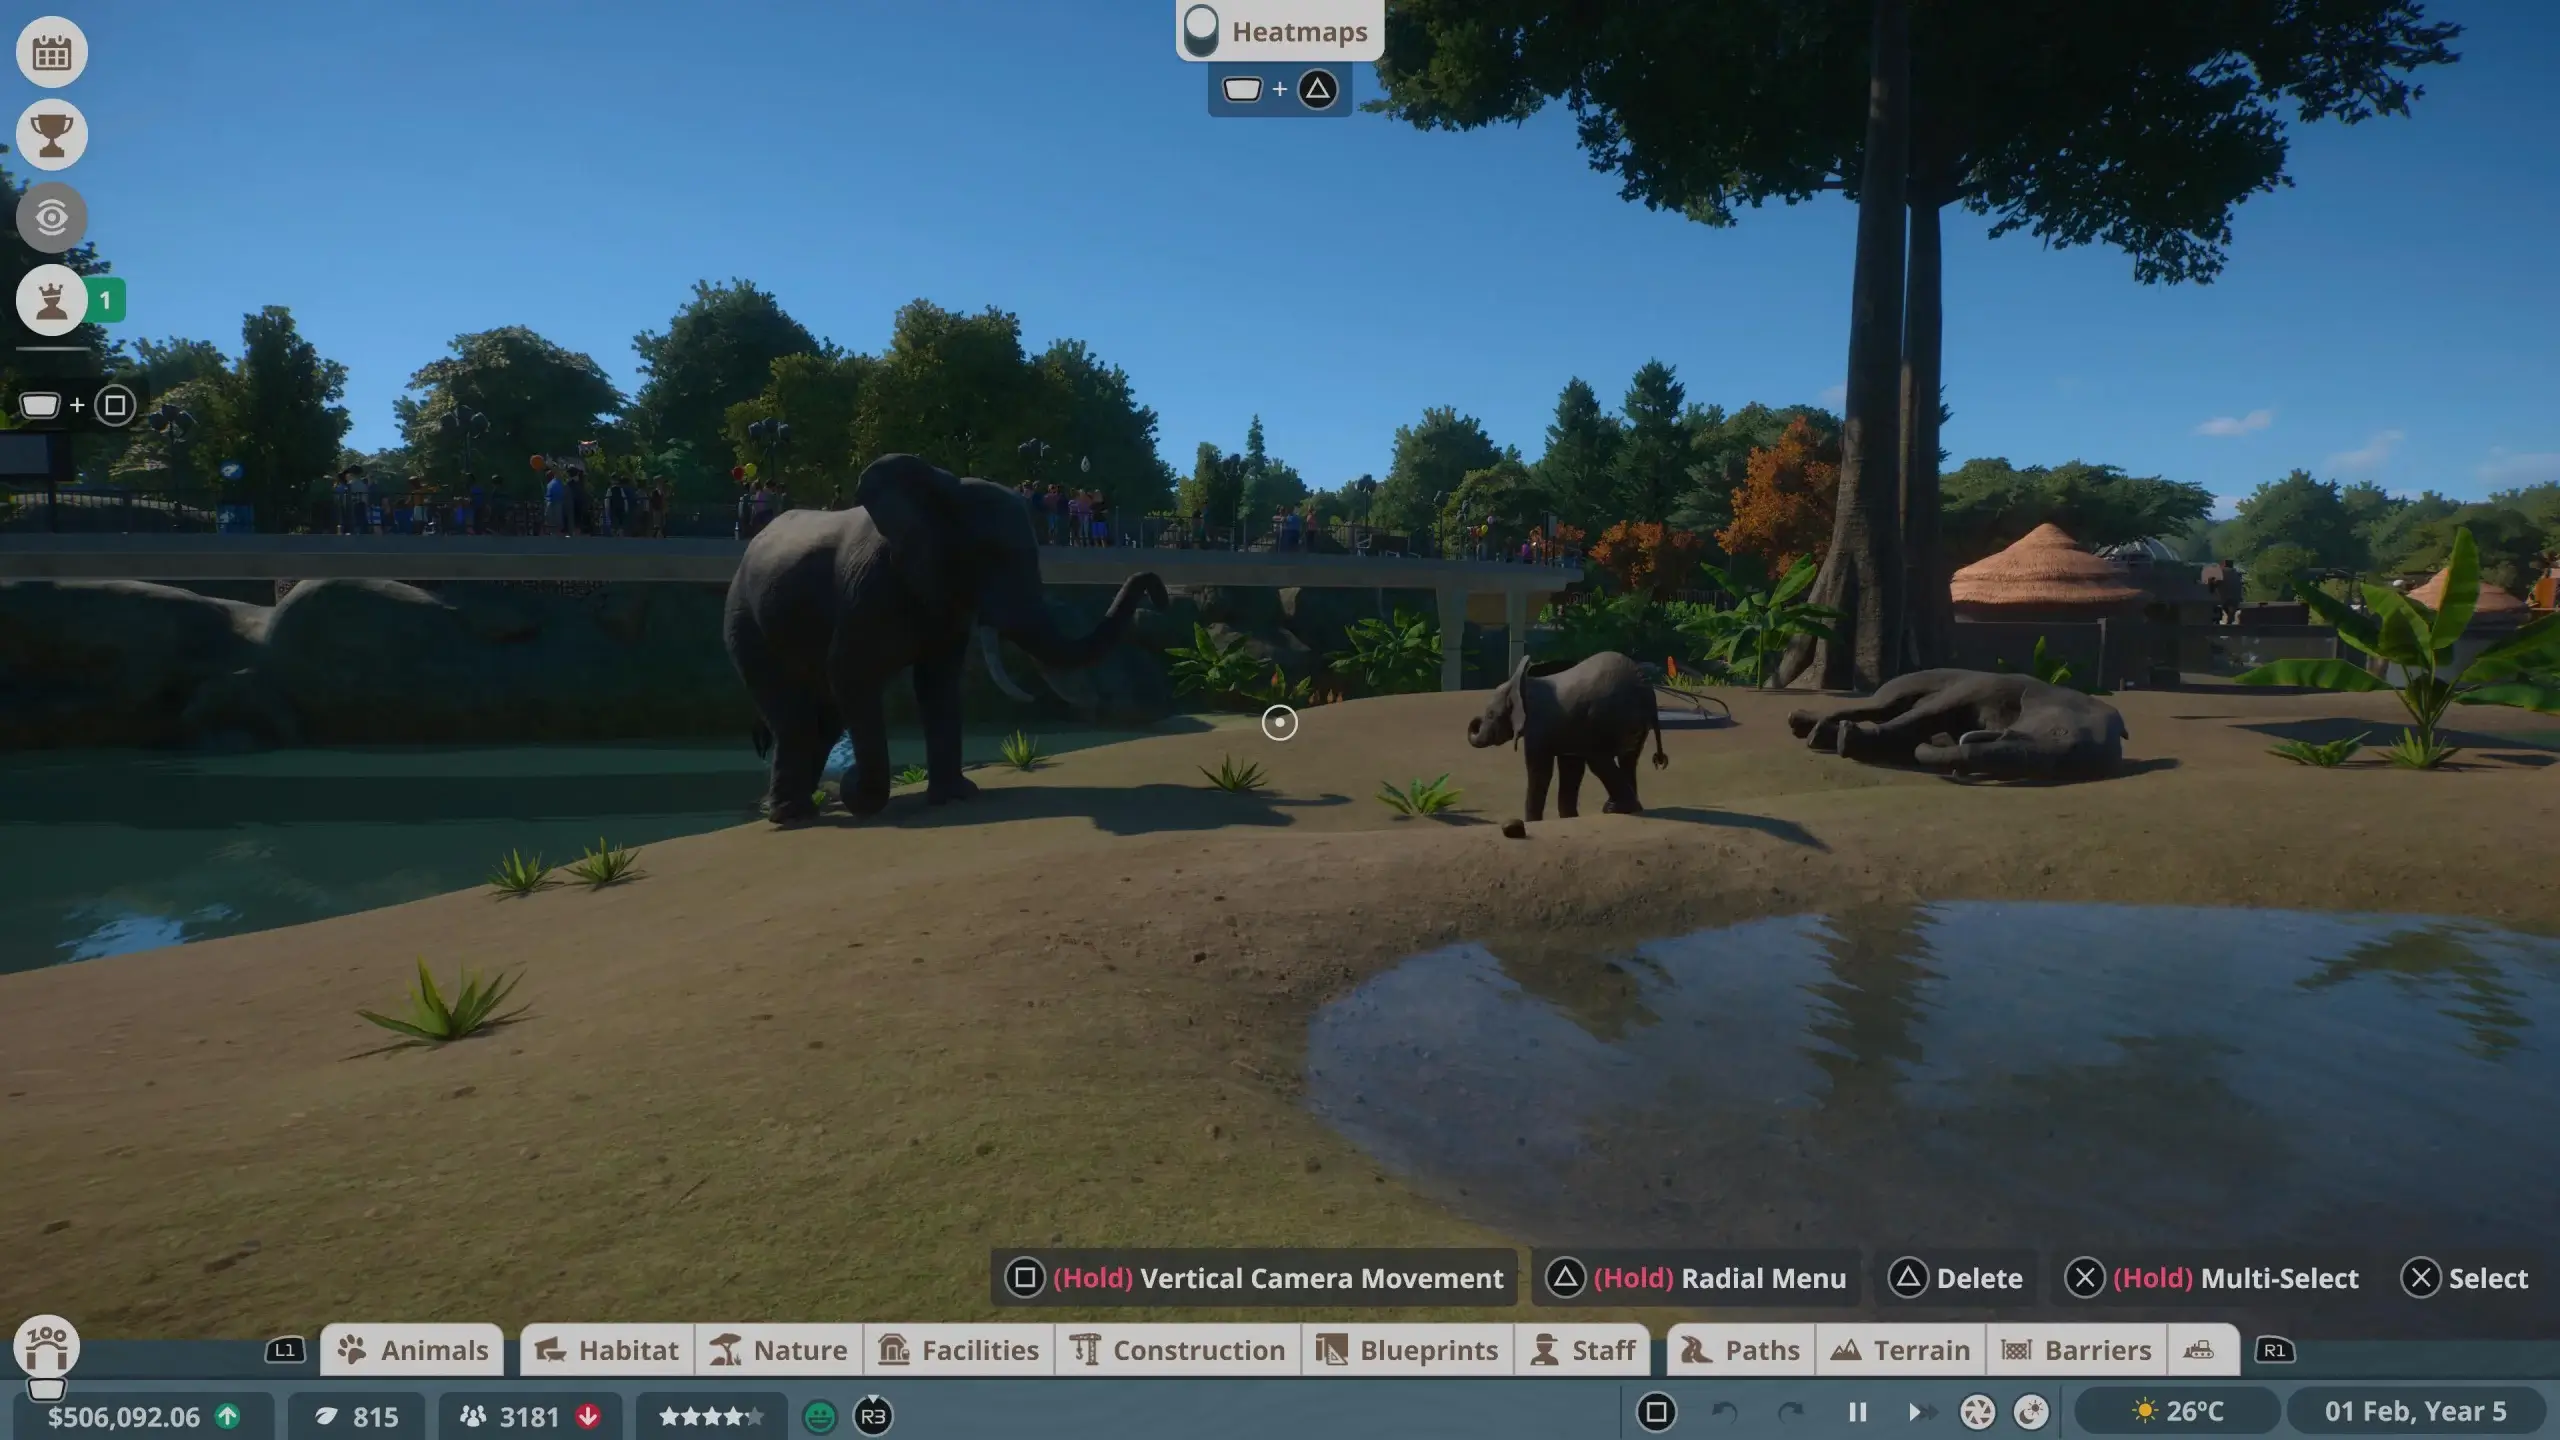 A close up of view of the elephant exhibit where 2 adults and a baby elephant have an area reminscient of their home with the terrain and water in their habitat. Also the Planet Zoo game menu along the bottom of the screen.